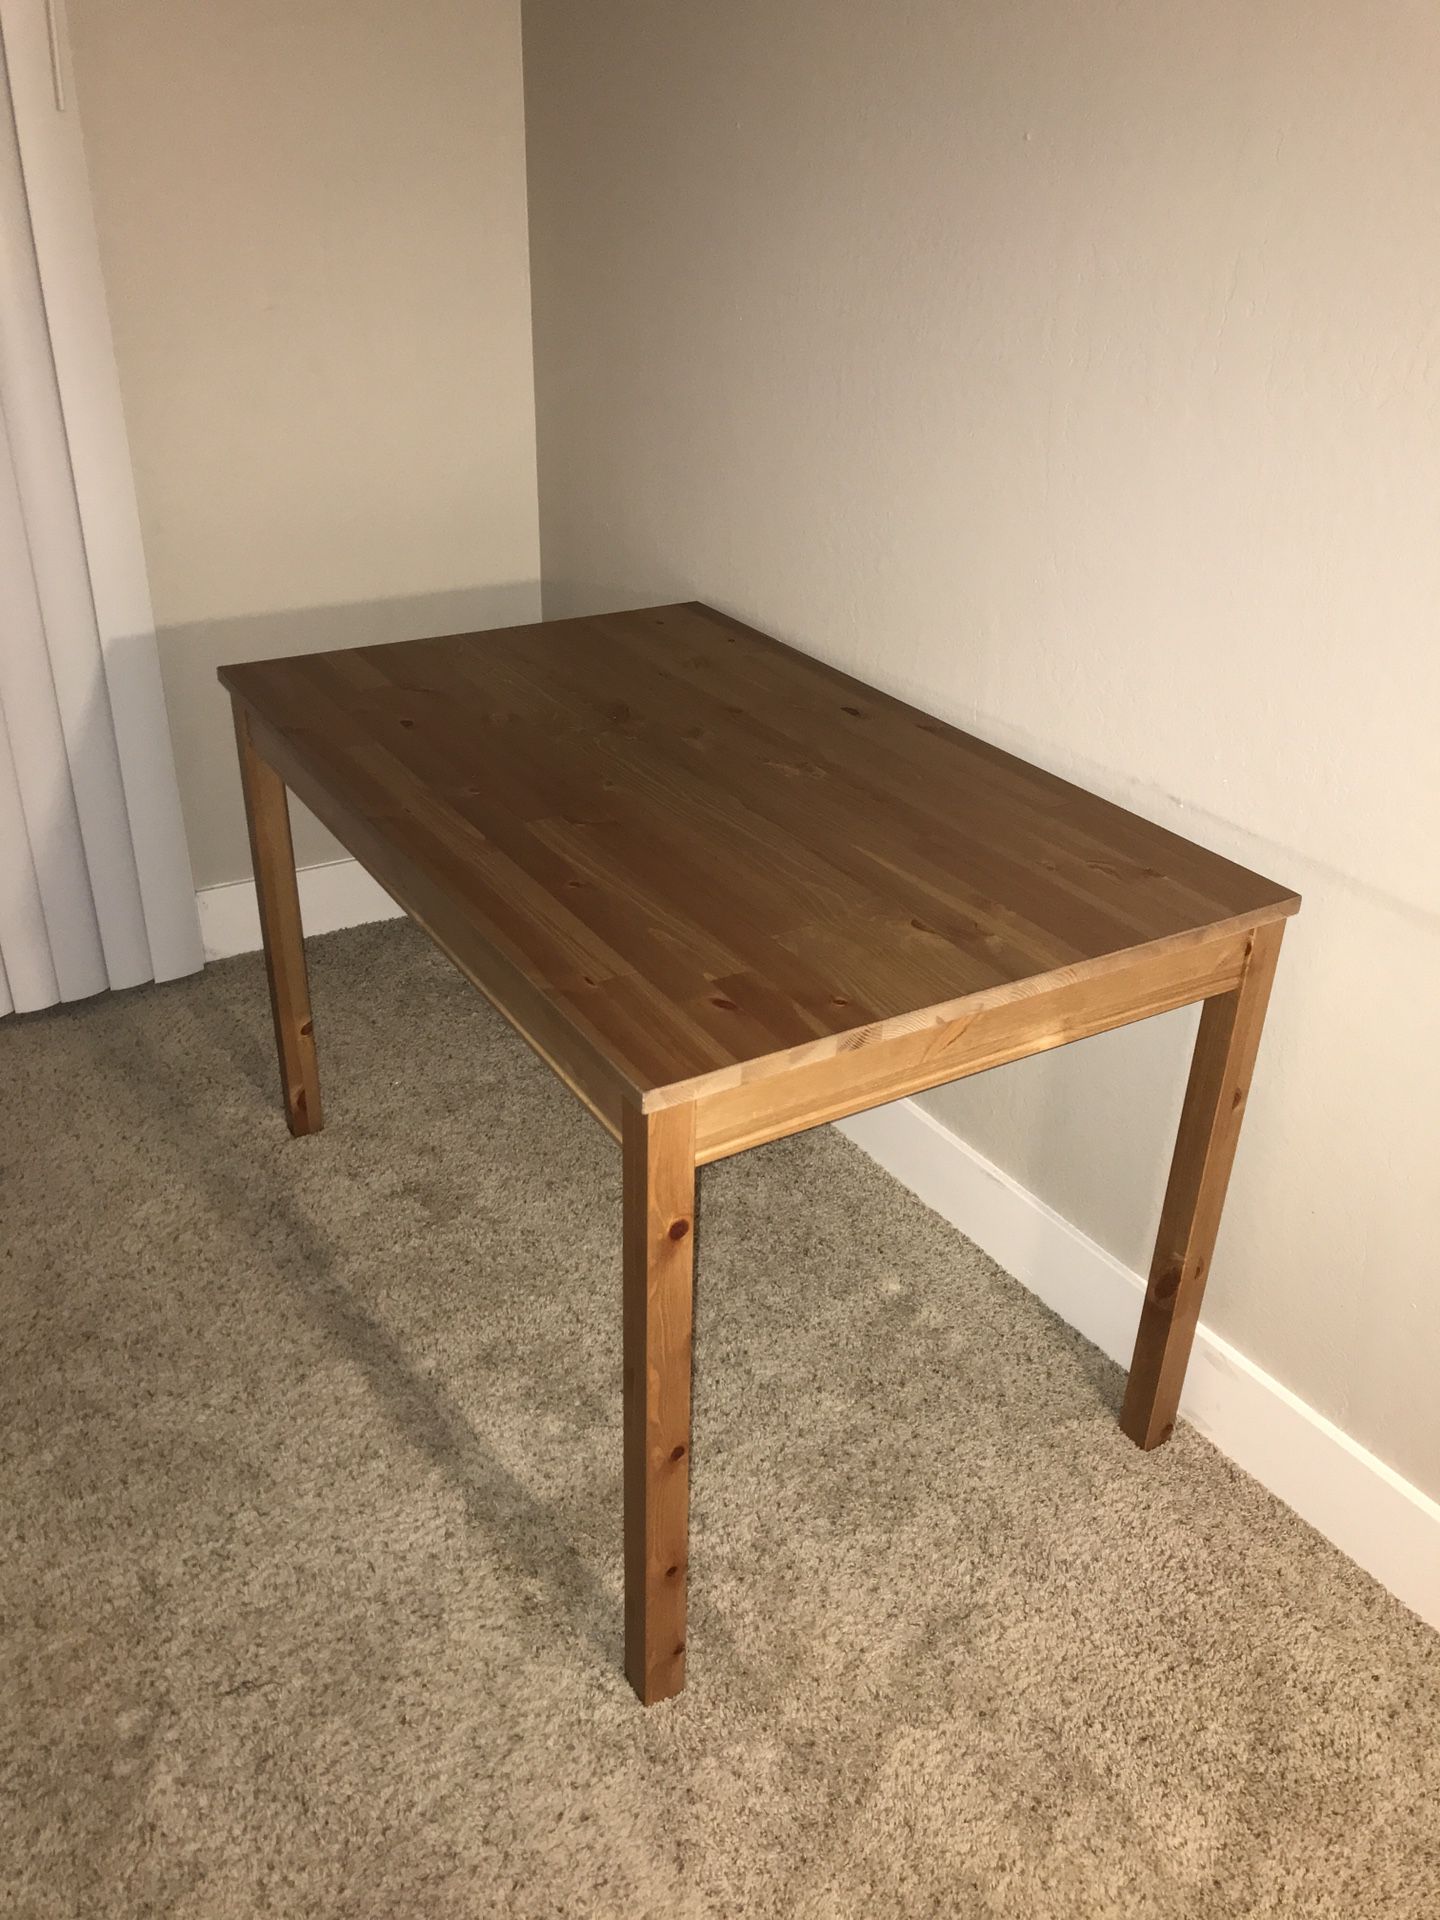 Ikea Table w/ 4 Chairs, Antique Stain